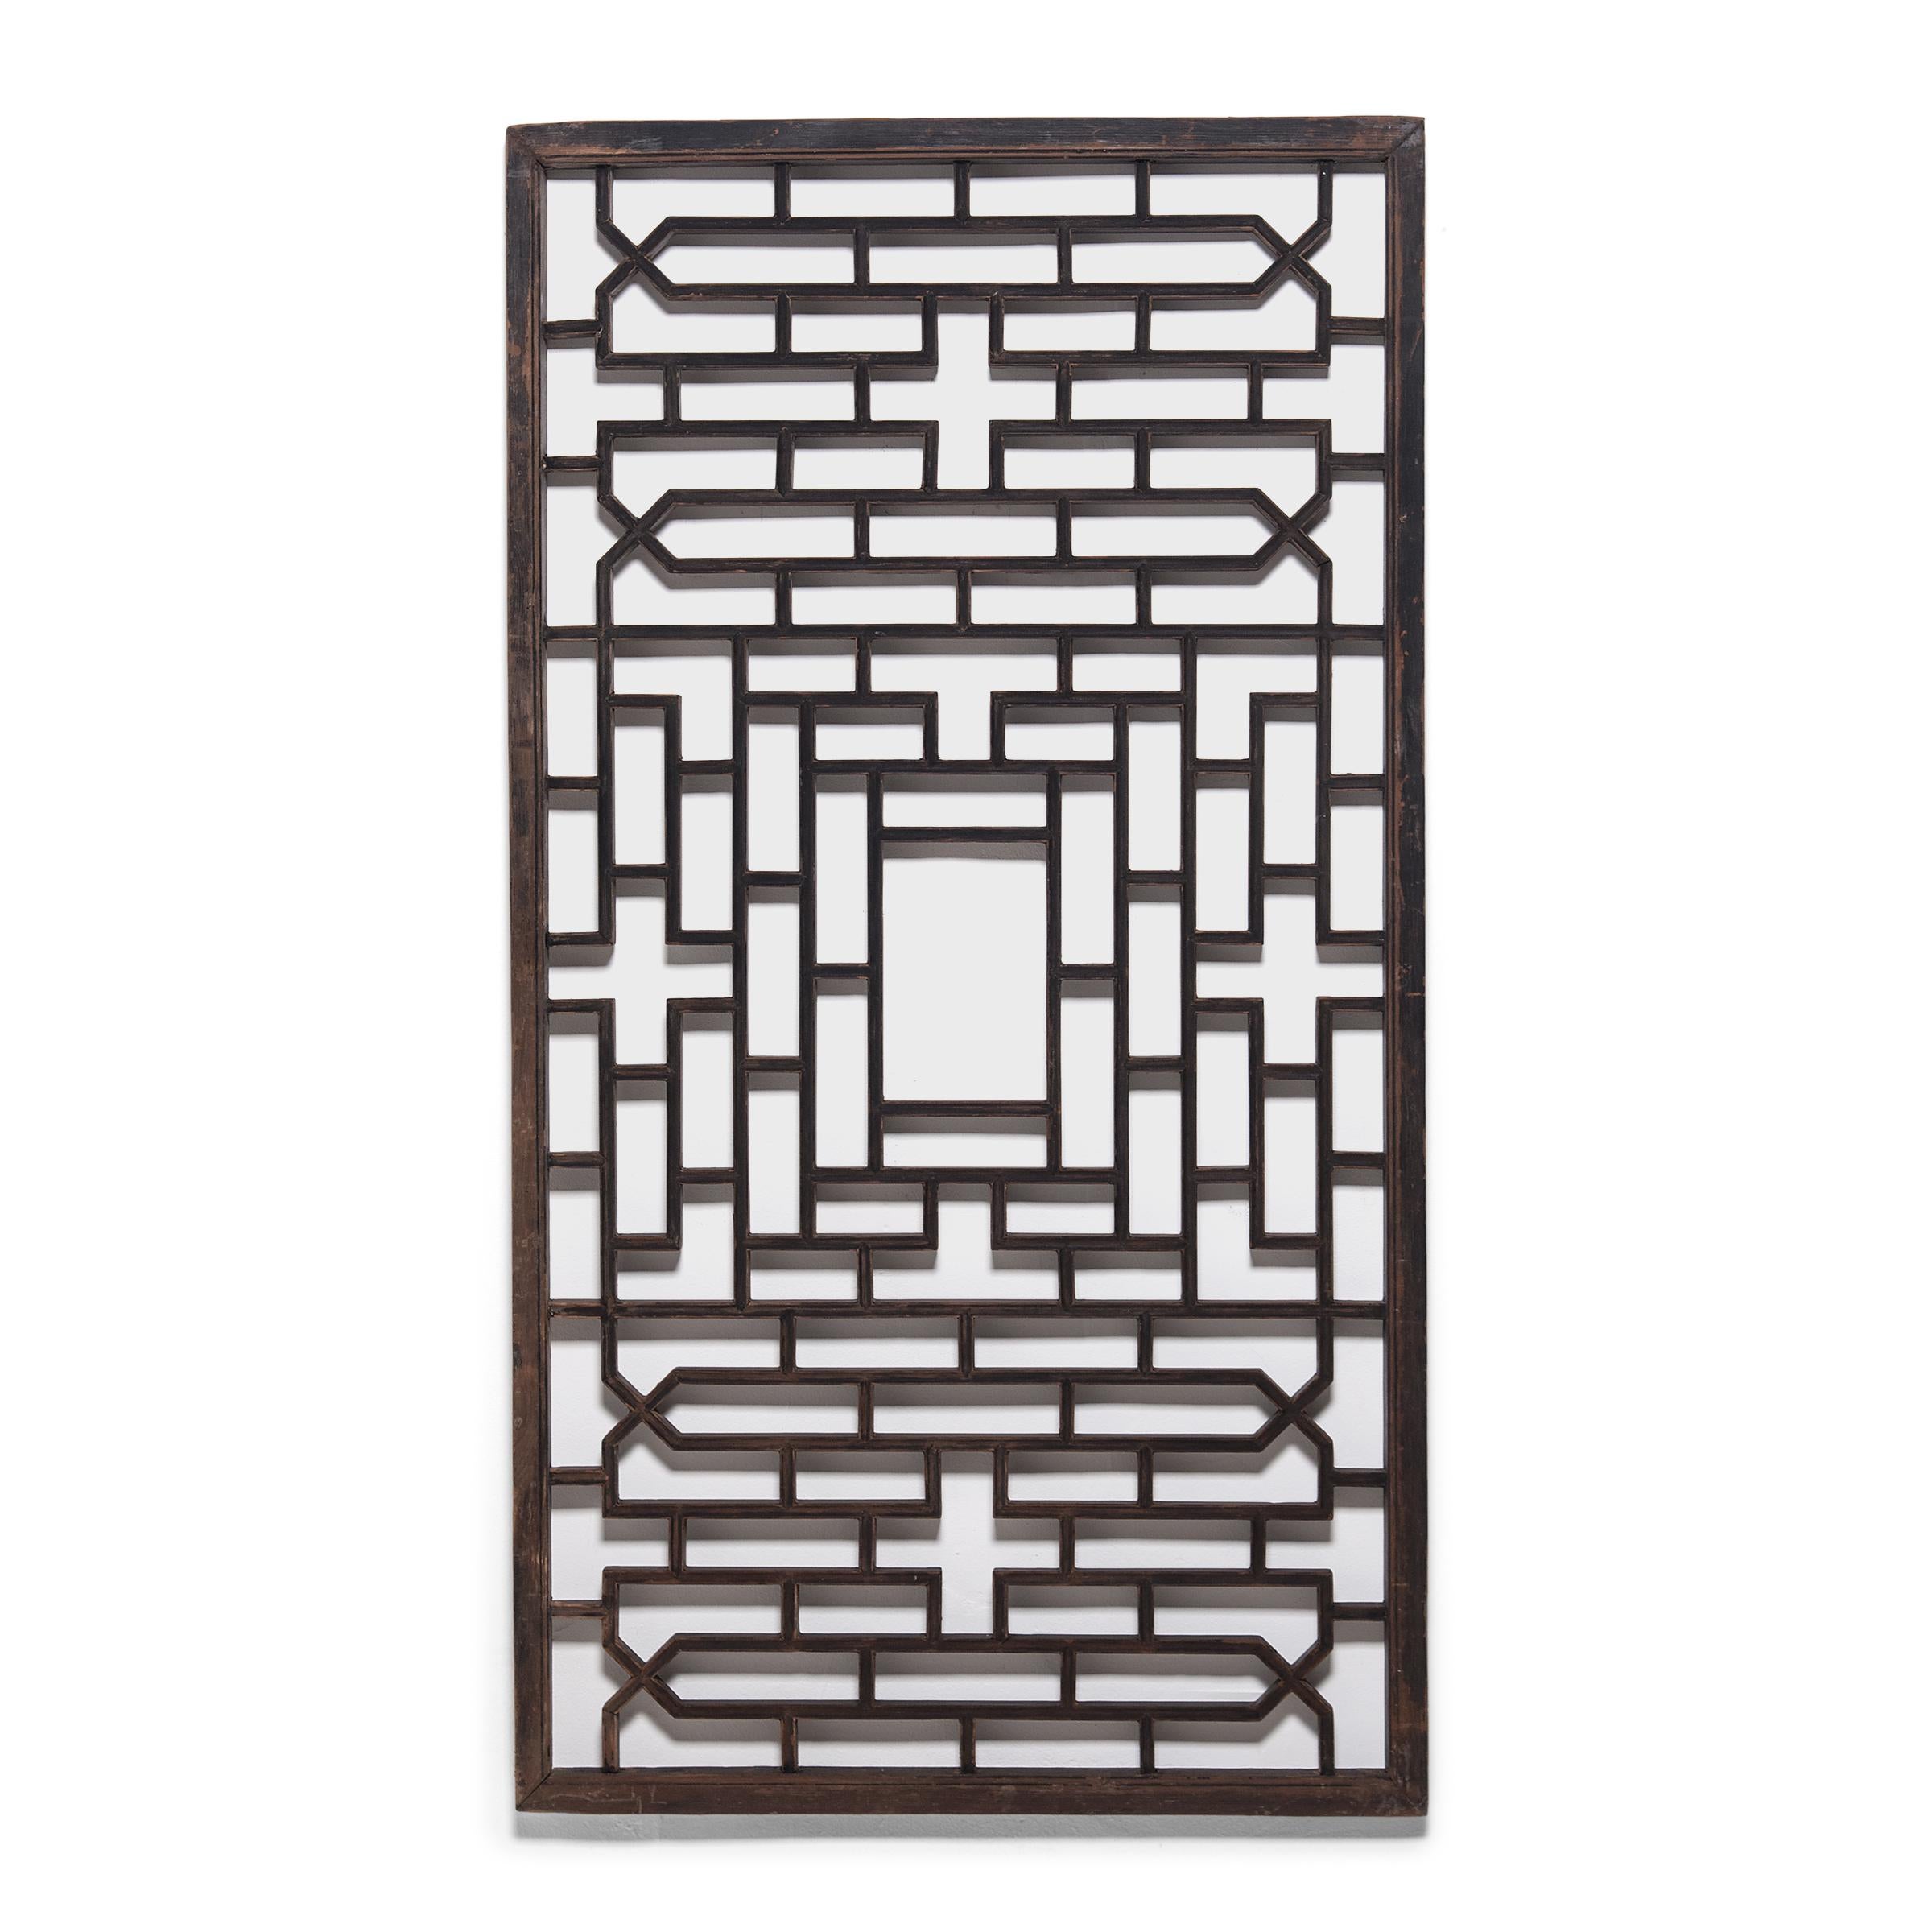 These early 20th century lattice window panels originated in Zhejiang province and once overlooked the interior courtyard of an aristocratic Chinese home. The geometric lattice pattern is linear and open, and was designed to allow light and fresh